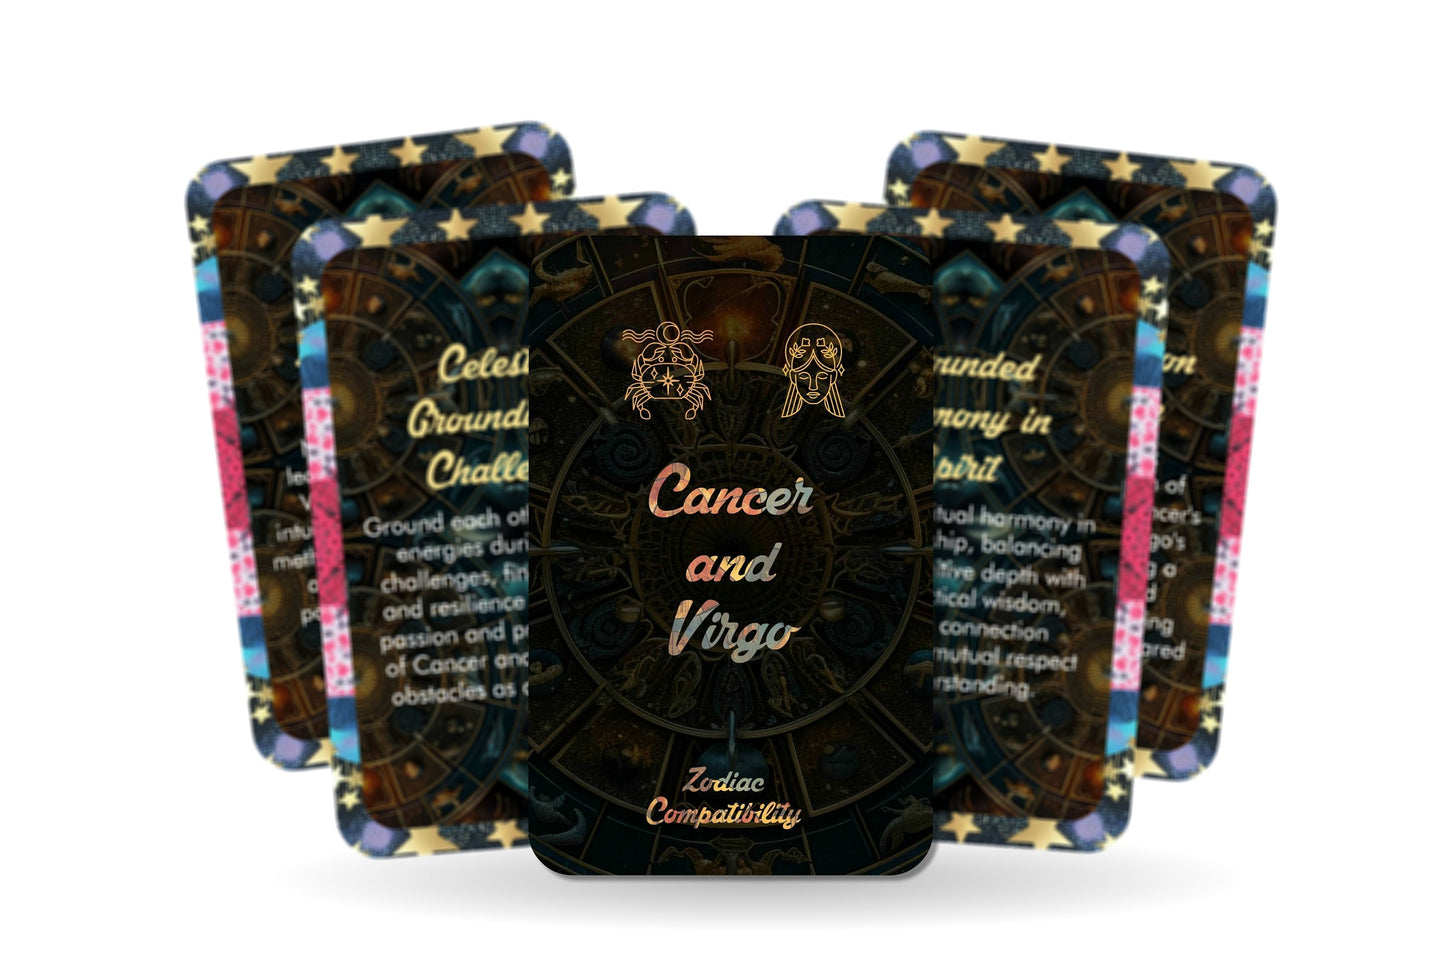 Cancer and Virgo - Zodiac Compatibility - Divination tools - Oracle cards - Star Sign Compatibility - Horoscope Compatibility Cards